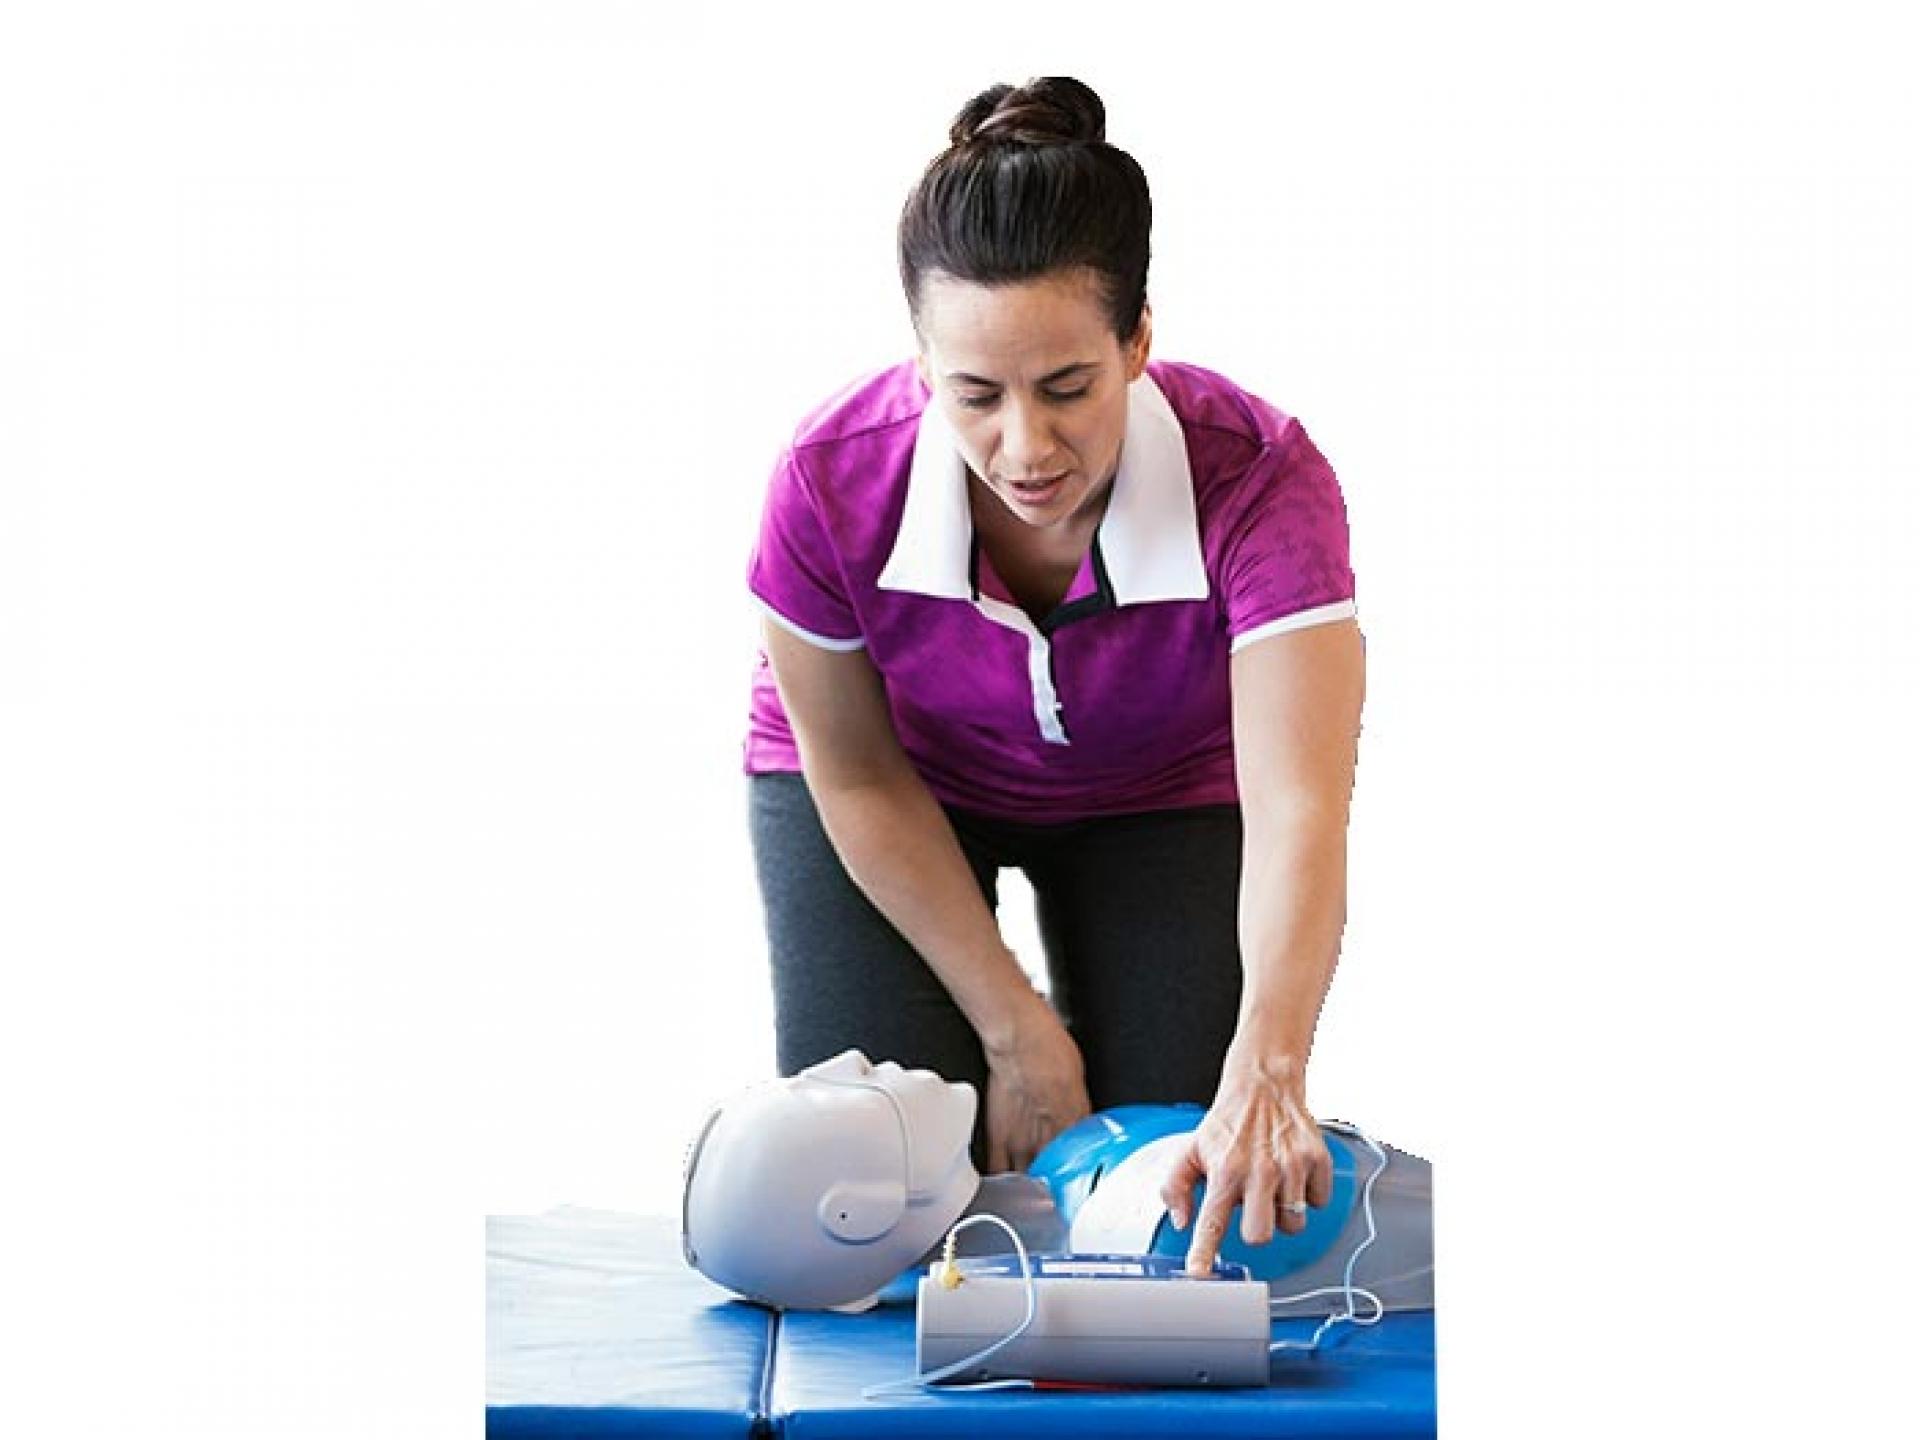 Learn to perform CPR with First Aid Solutions